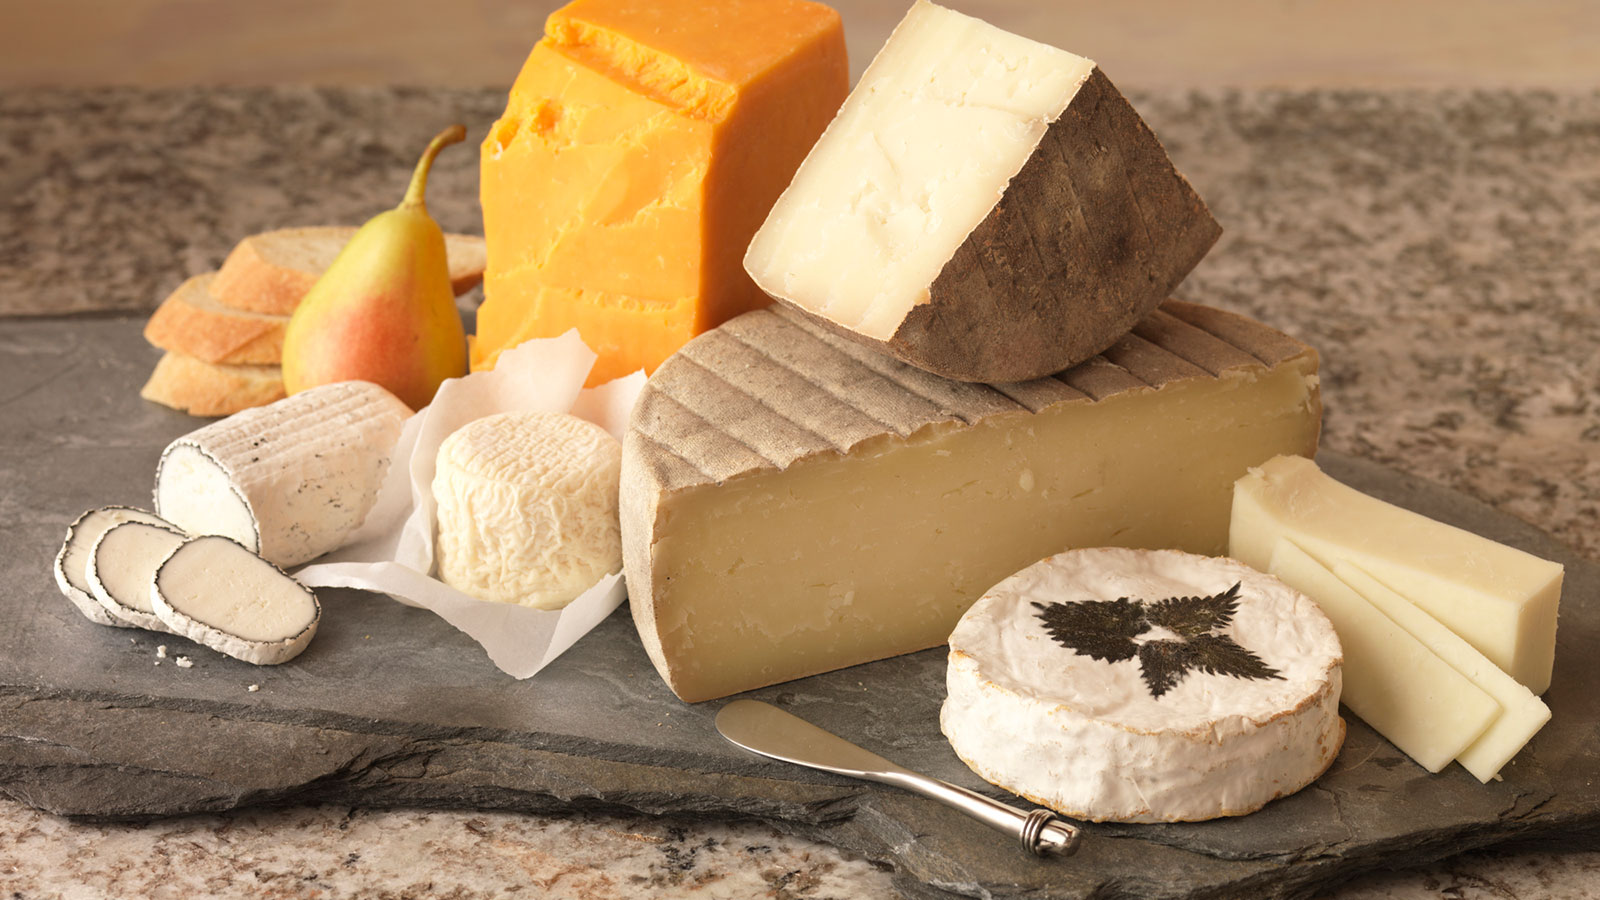 What are the characteristics of the best gourmet cheese?